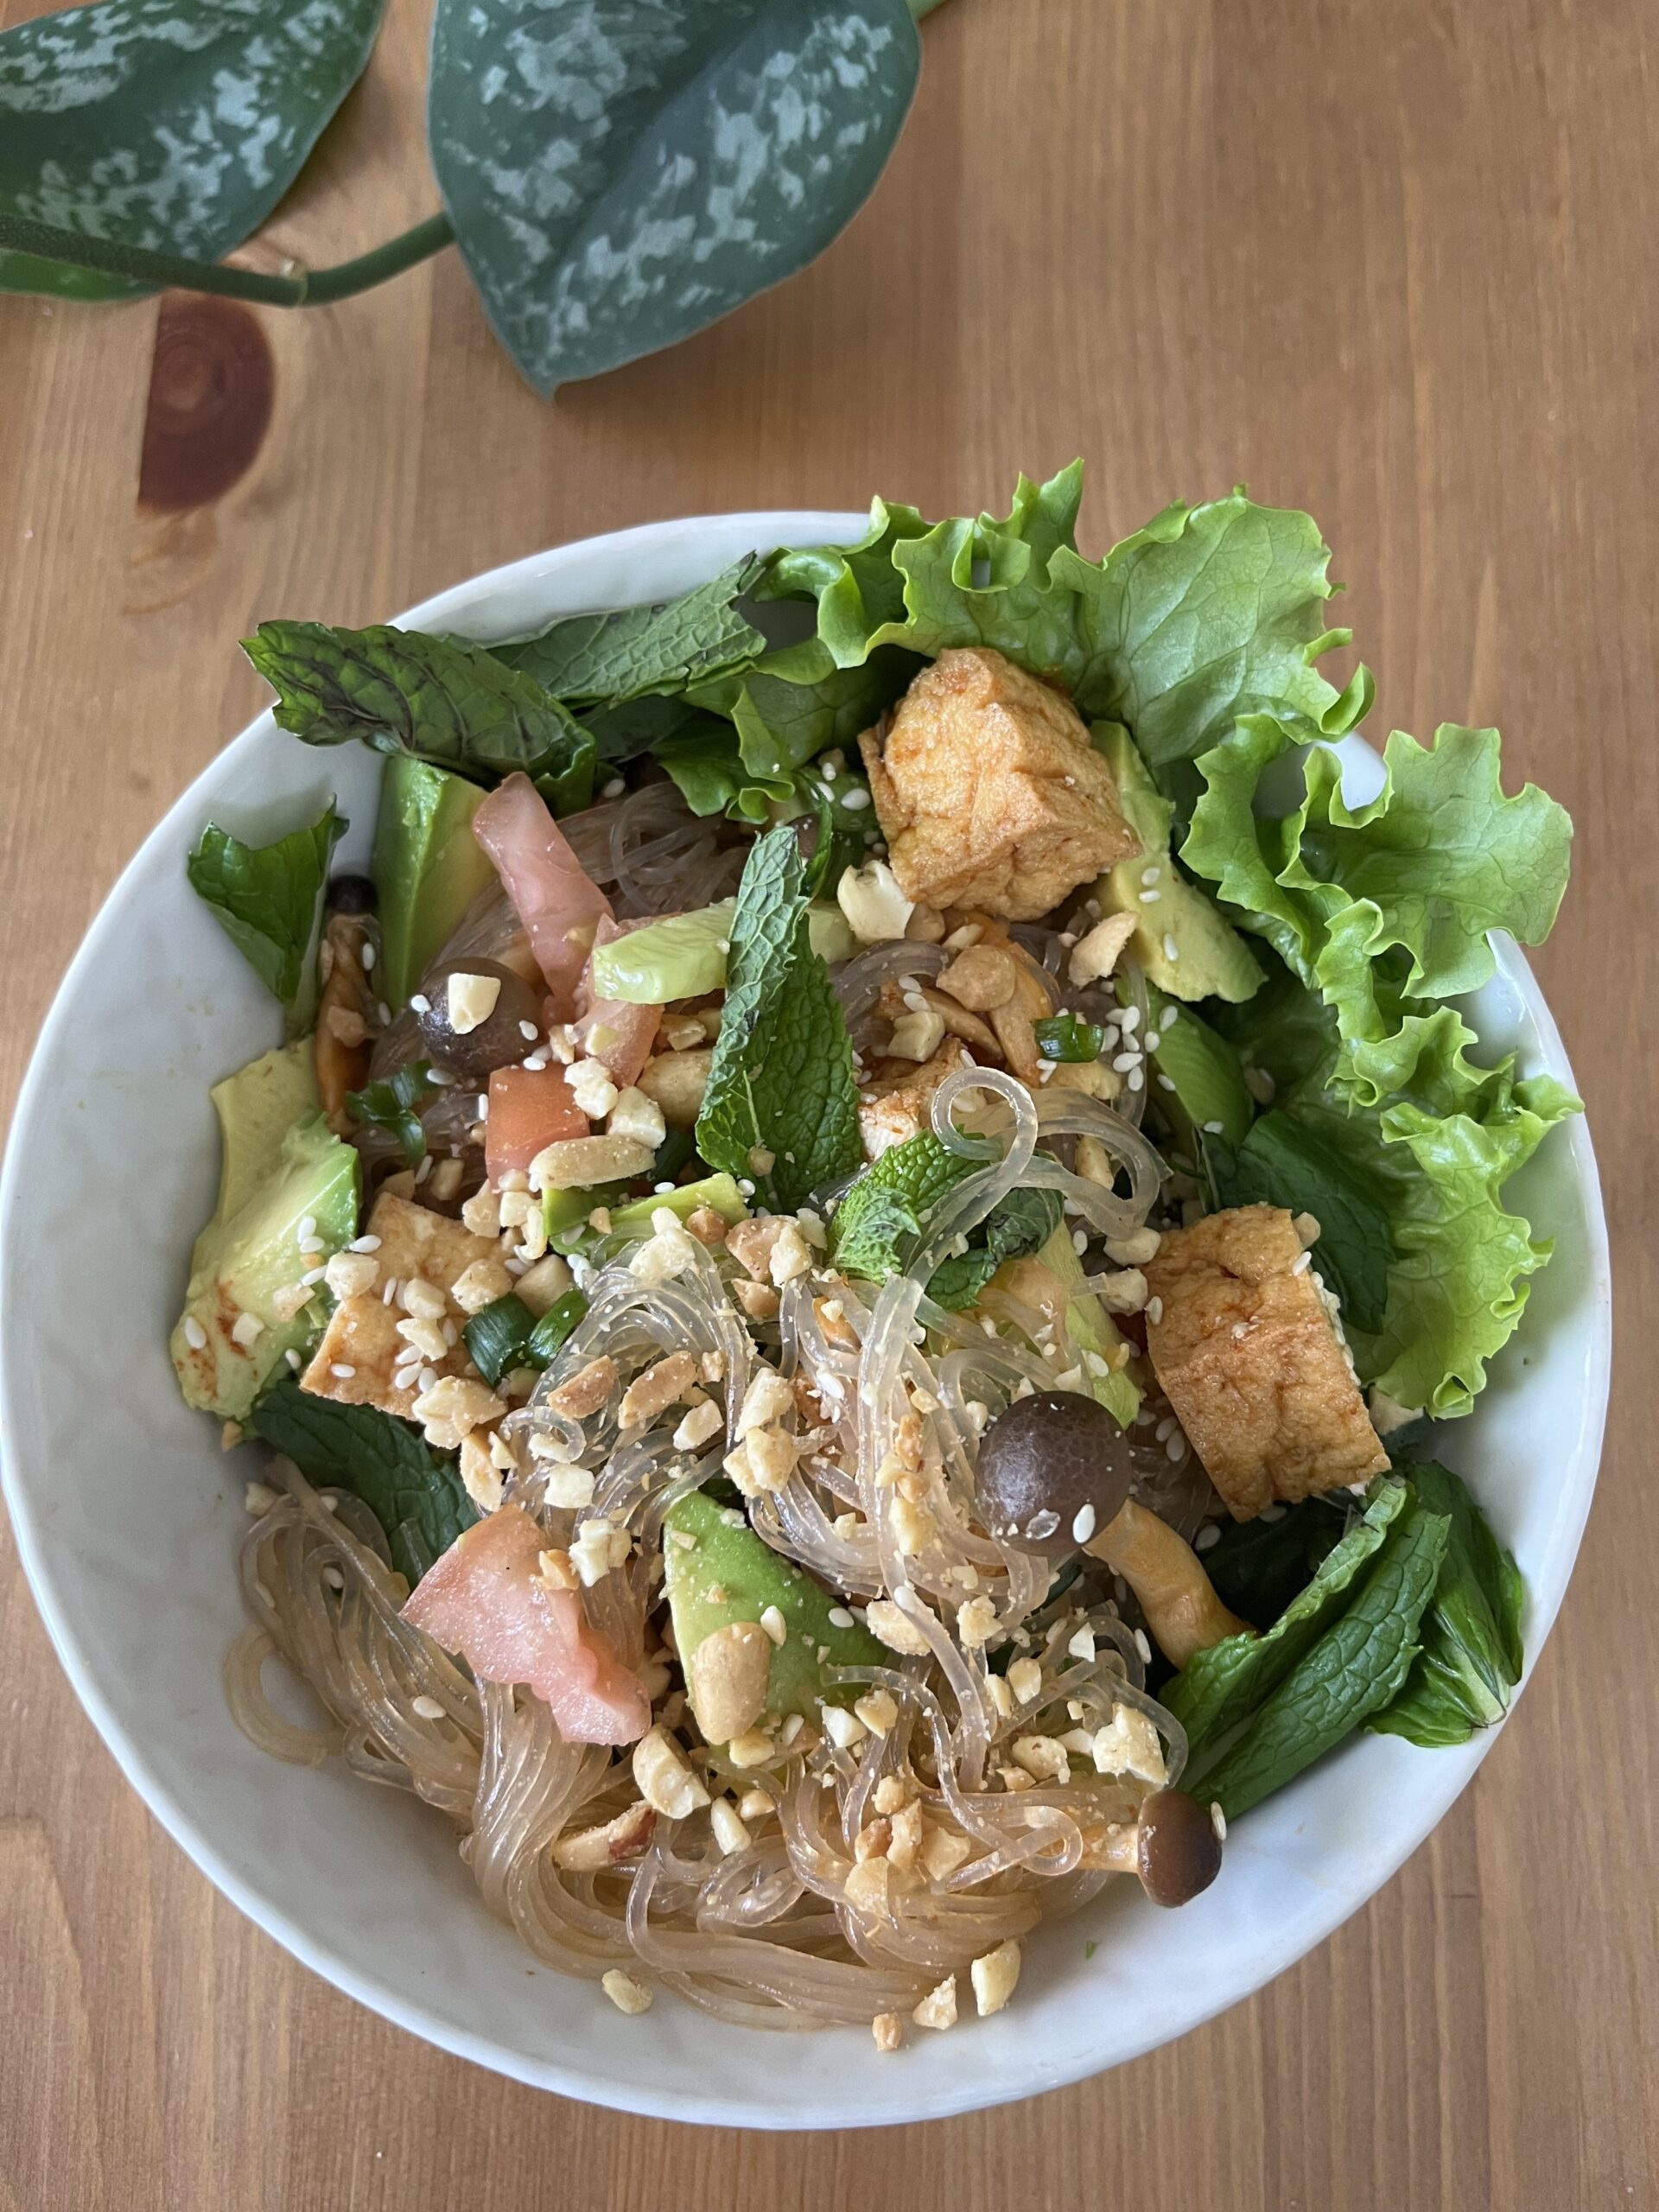 A photo of a bowl of noodle salad on a wooden table. The bowl has lettuce, tofu, mushrooms, and more vegetables.